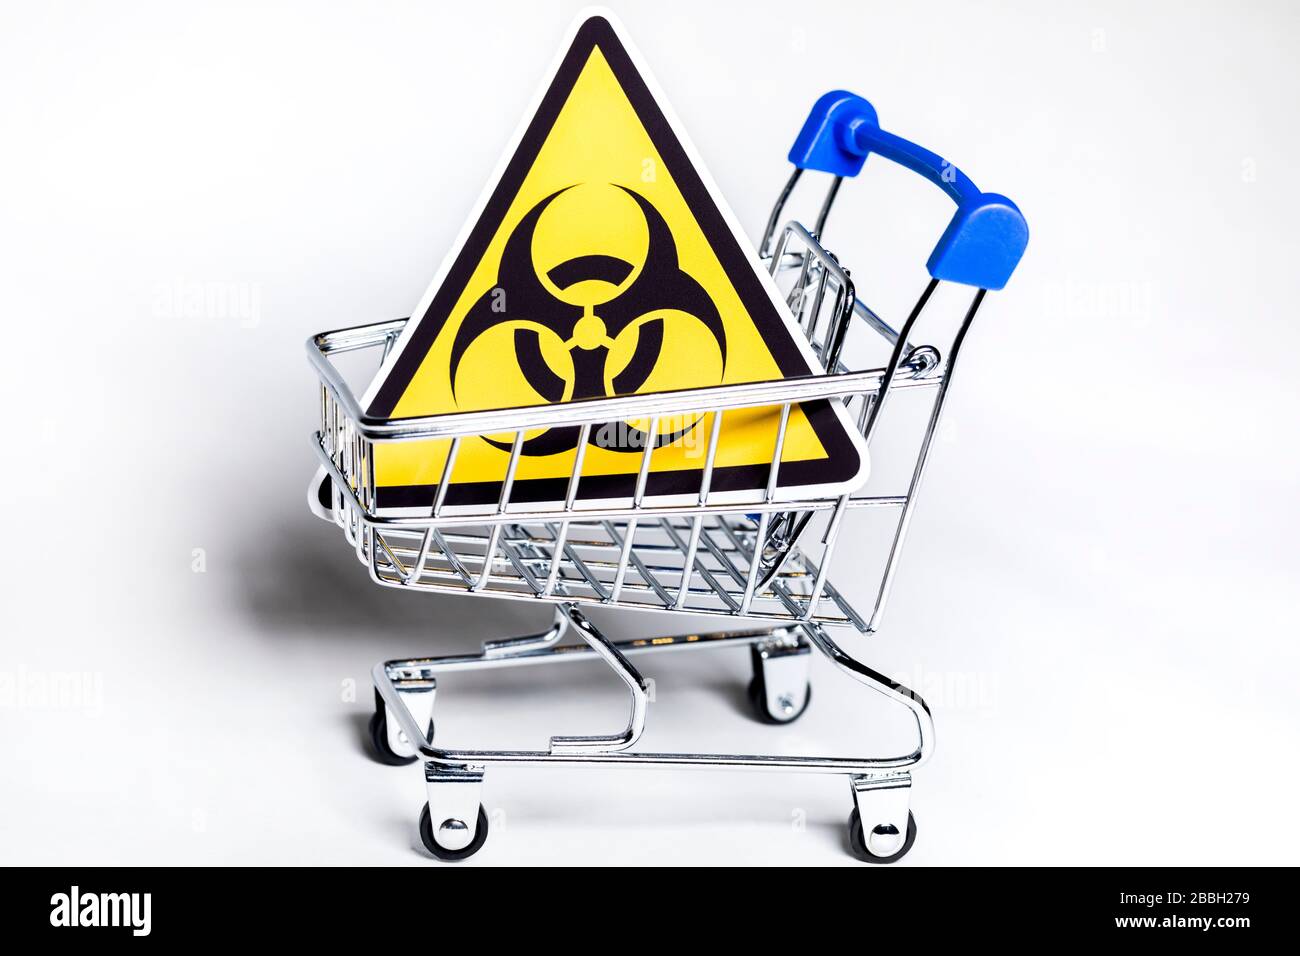 A biological hazard sign in a shopping cart on white background Stock Photo